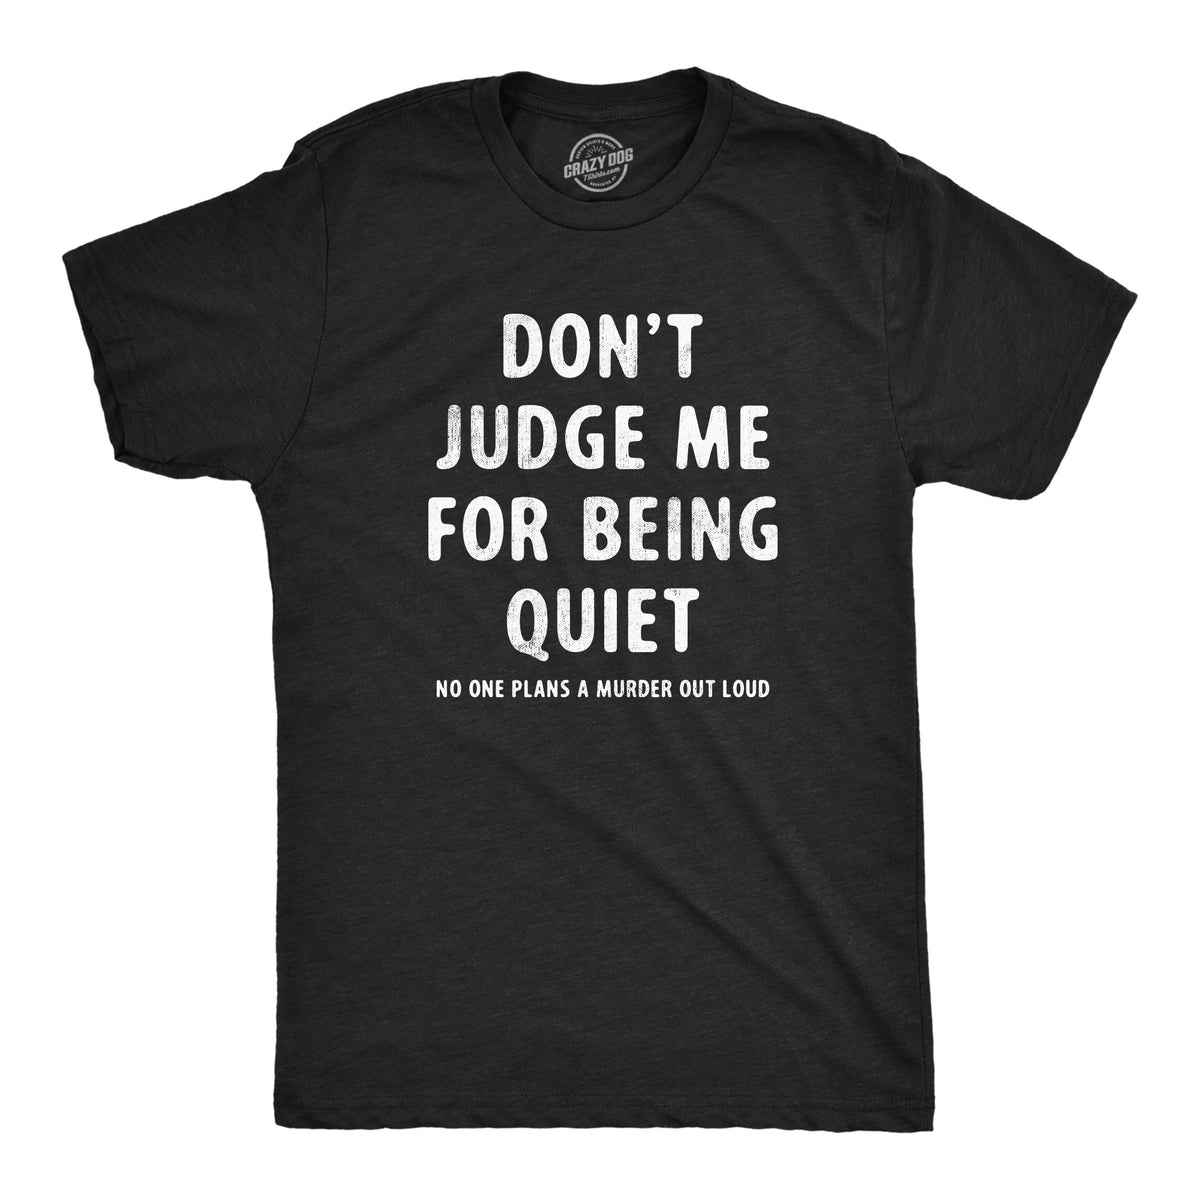 Funny Heather Black - QUIET Dont Judge Me For Being Quiet Mens T Shirt Nerdy Sarcastic Tee